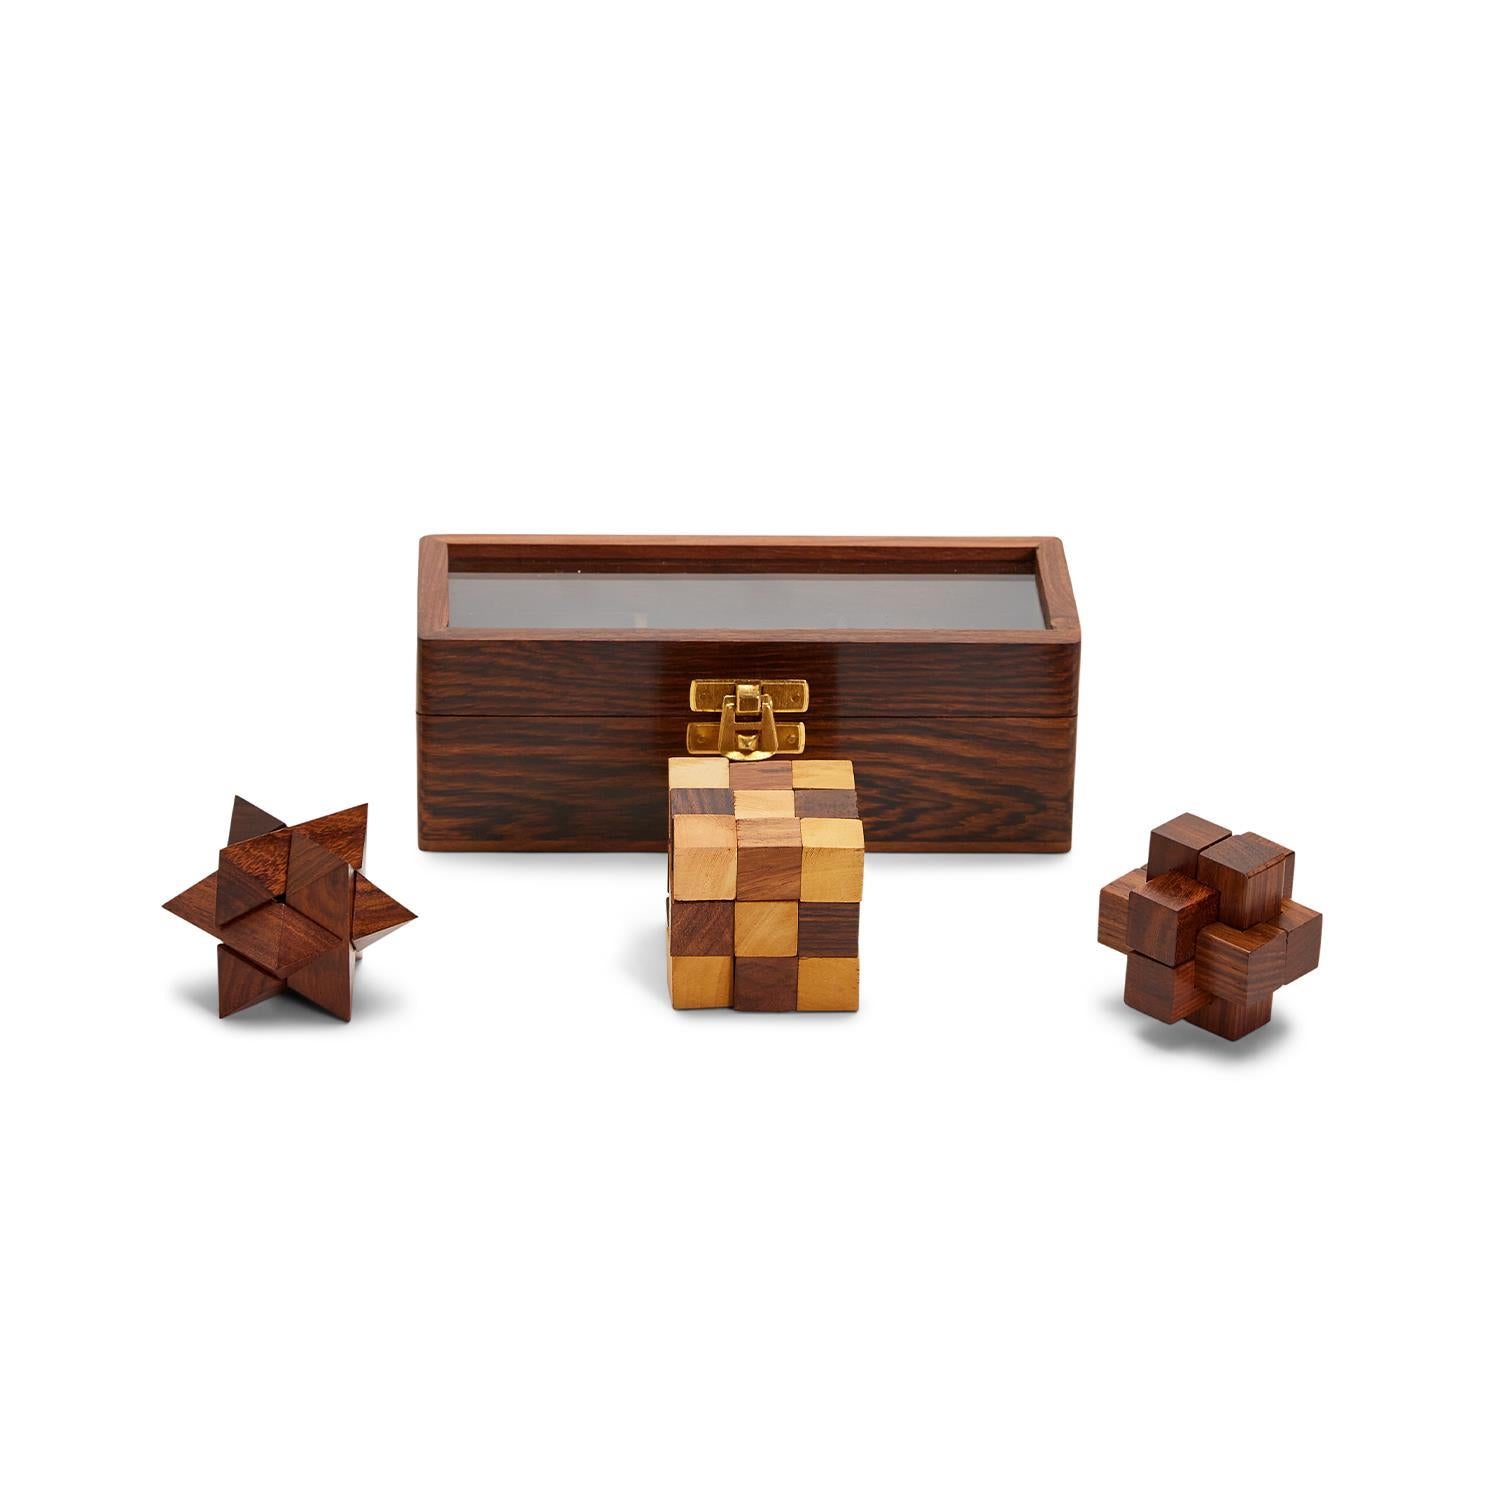 Wood Crafted Puzzles In Storage Box